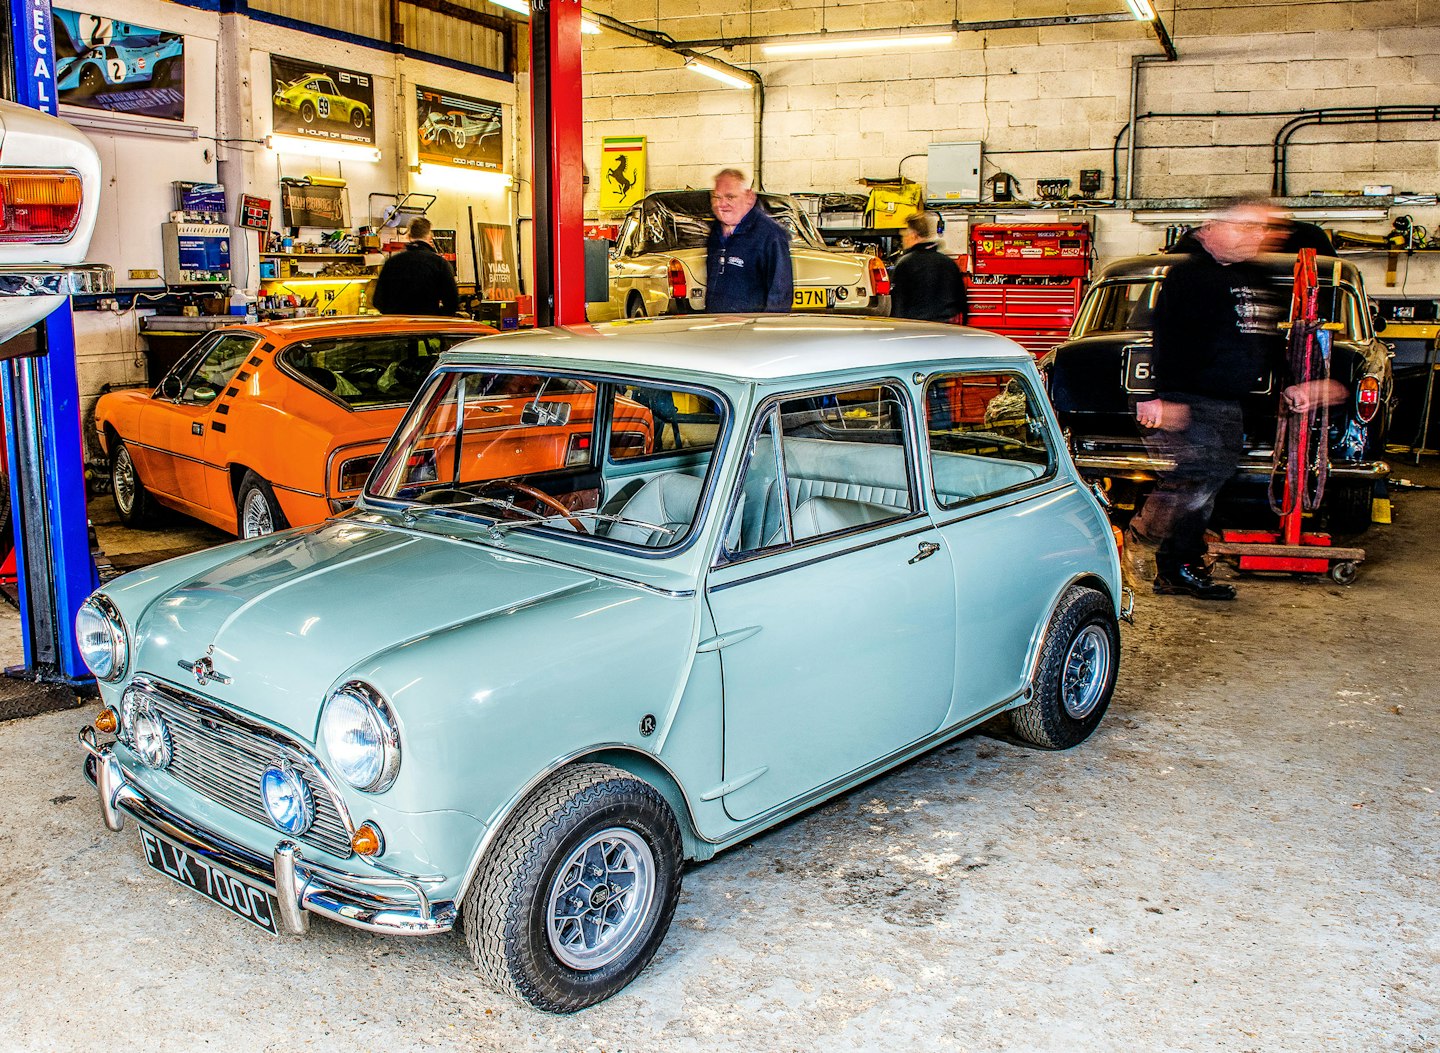 Epic Restoration – the tale of a tricky rebuild by clever craftsmen